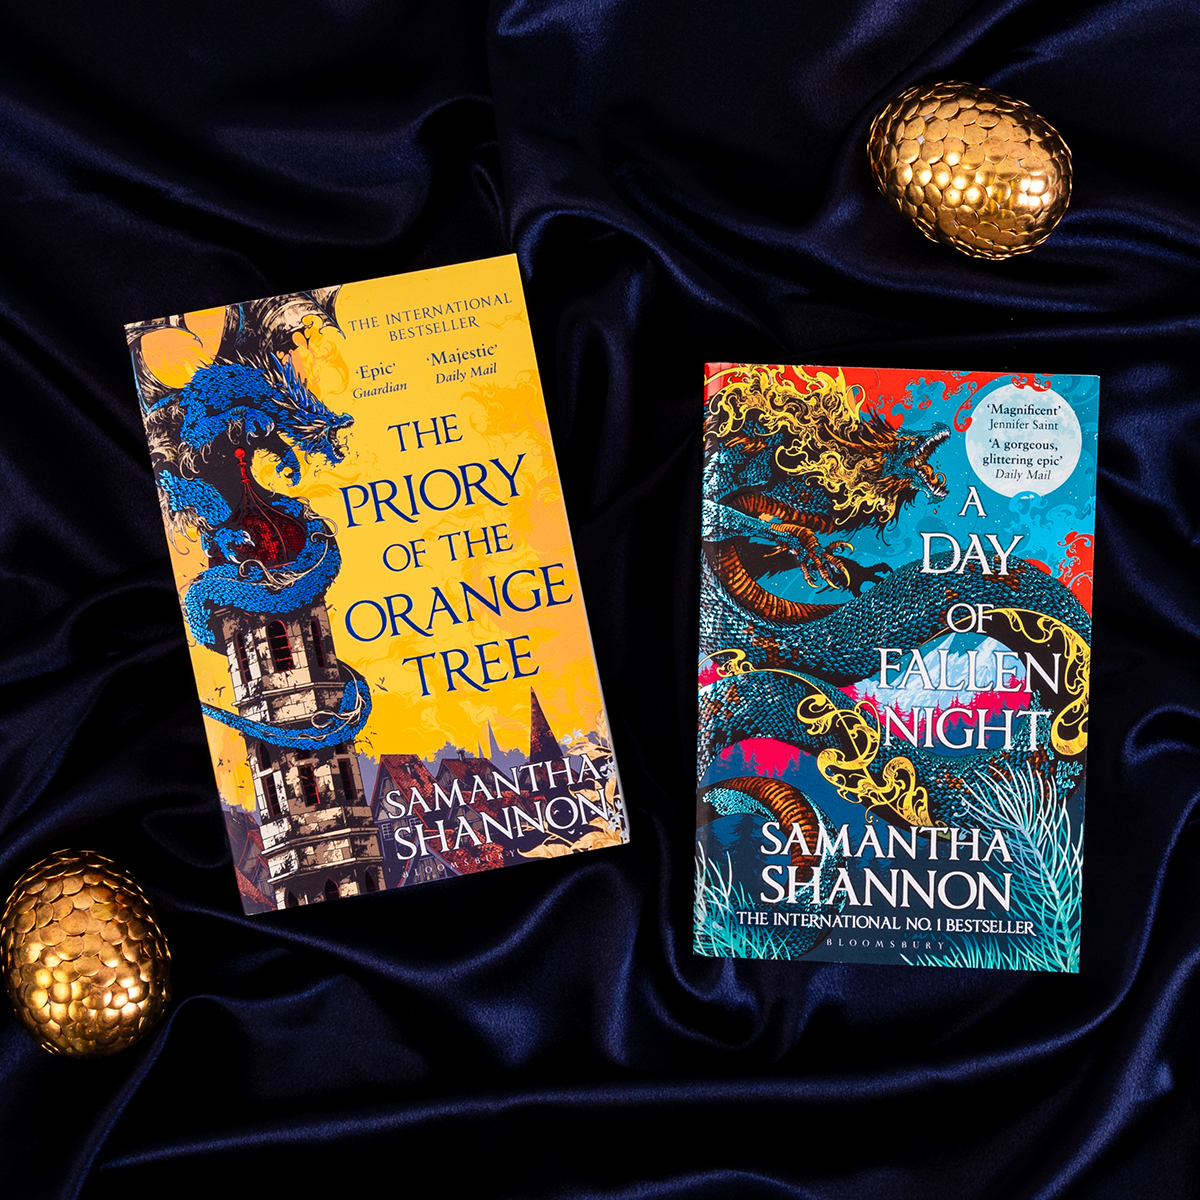 Return to the magical world of The Priory of the Orange Tree and discover the events that led to its epic story 🐉 A Day of Fallen Night is now out in paperback! Run, don't walk, and order your copy: amzn.to/3U2racq